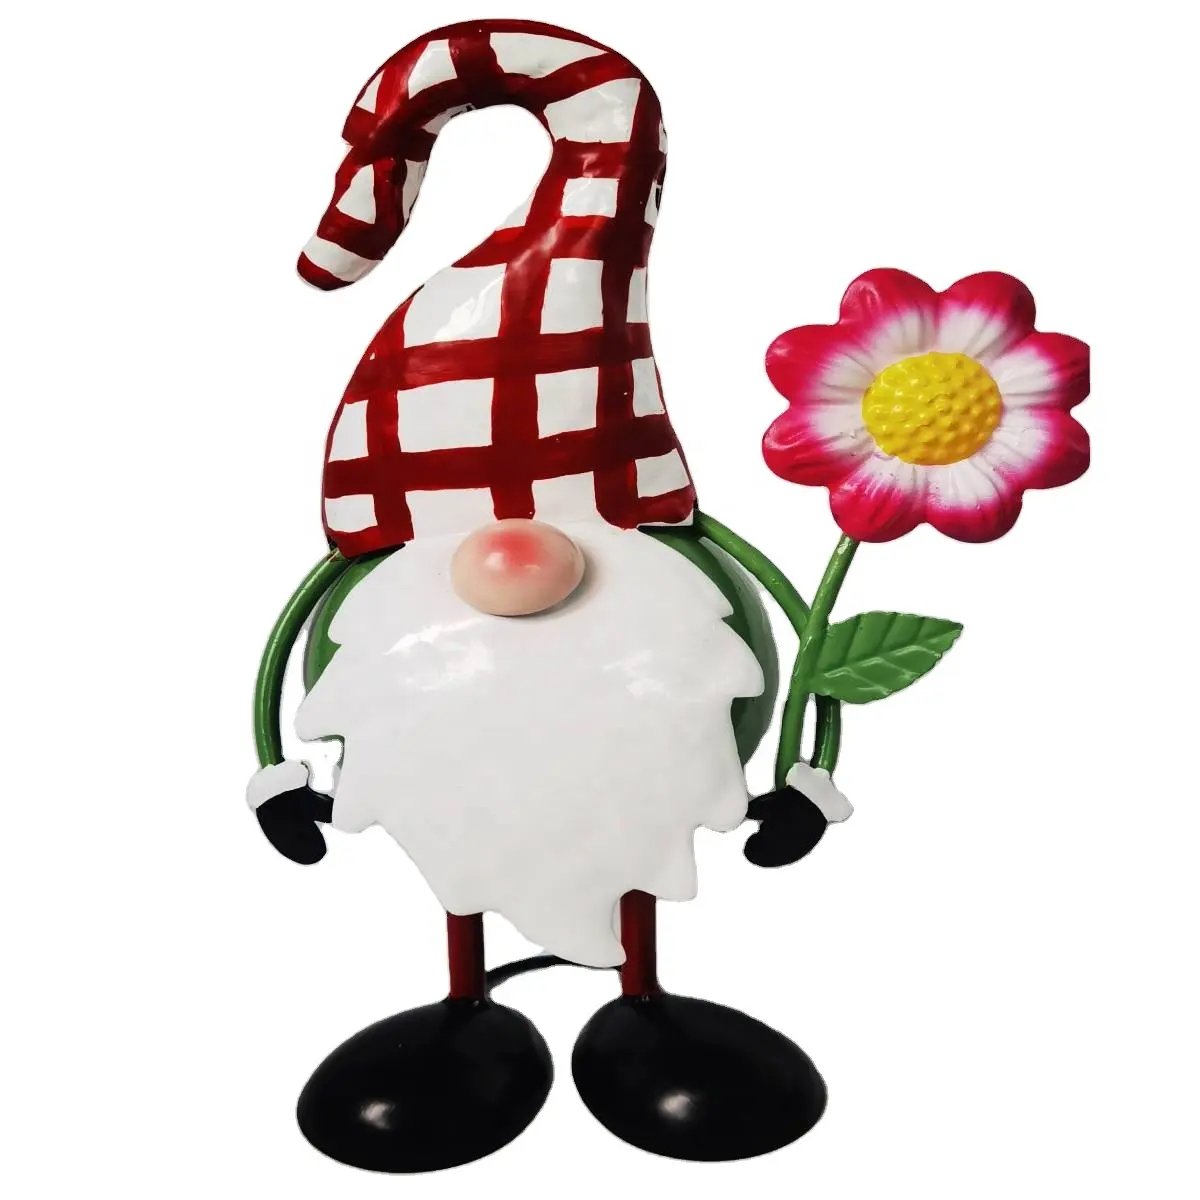 New Year Christmas Ornament Christmas Home Decorations Santa Claus with Flower Decorations